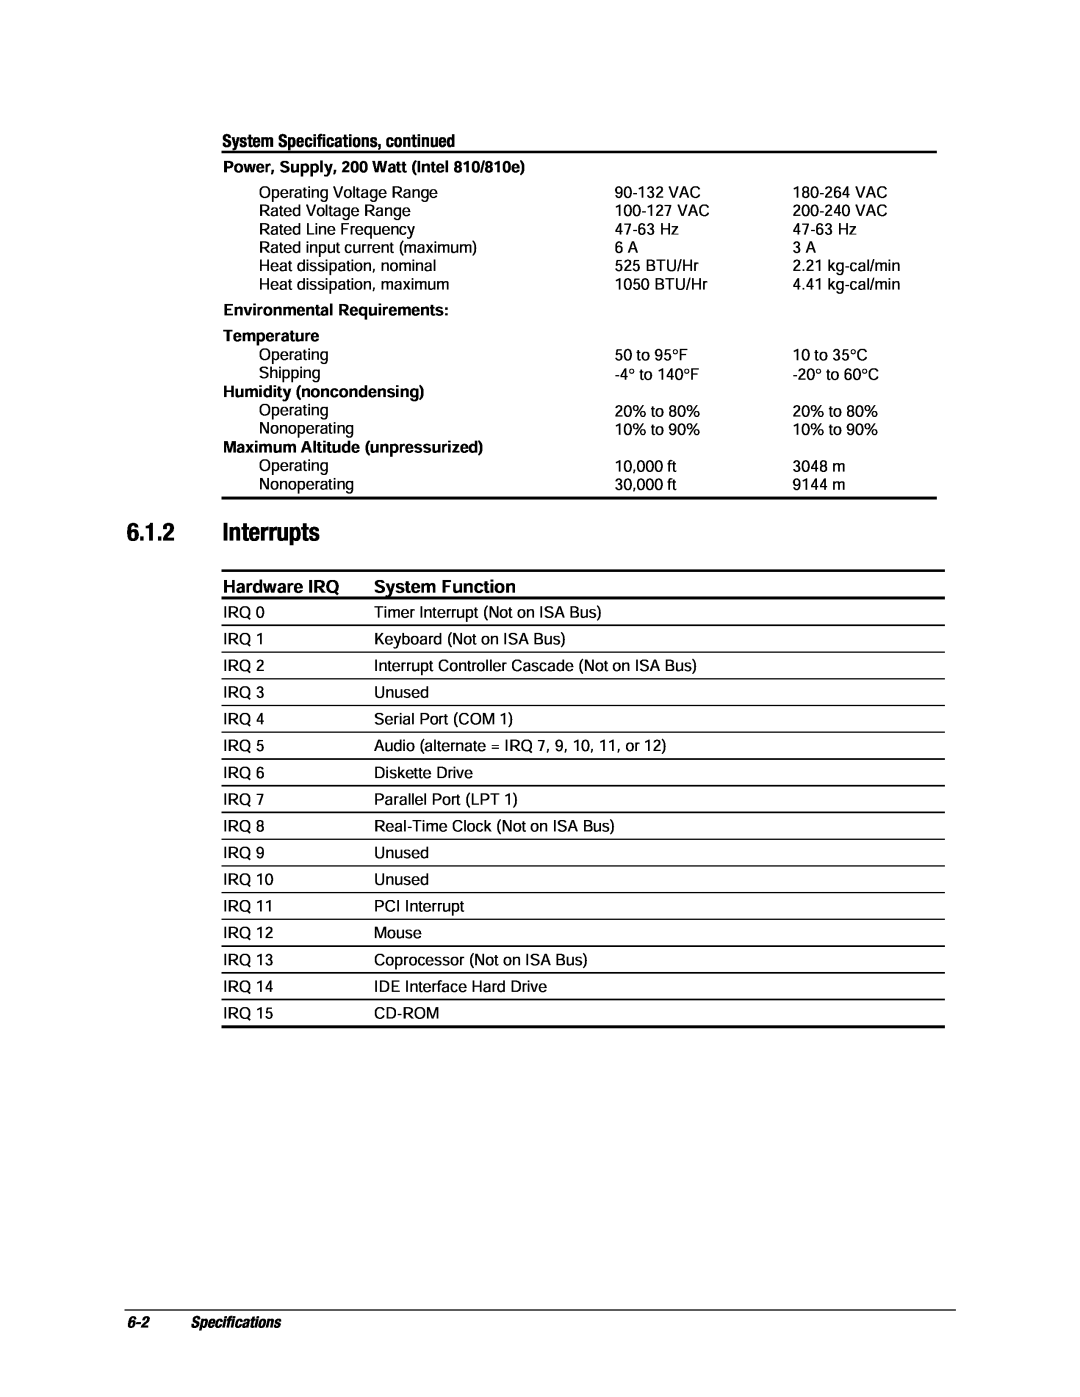 Compaq EP Series manual Interrupts, 6.1.2, Hardware IRQ, System Function, Specifications 